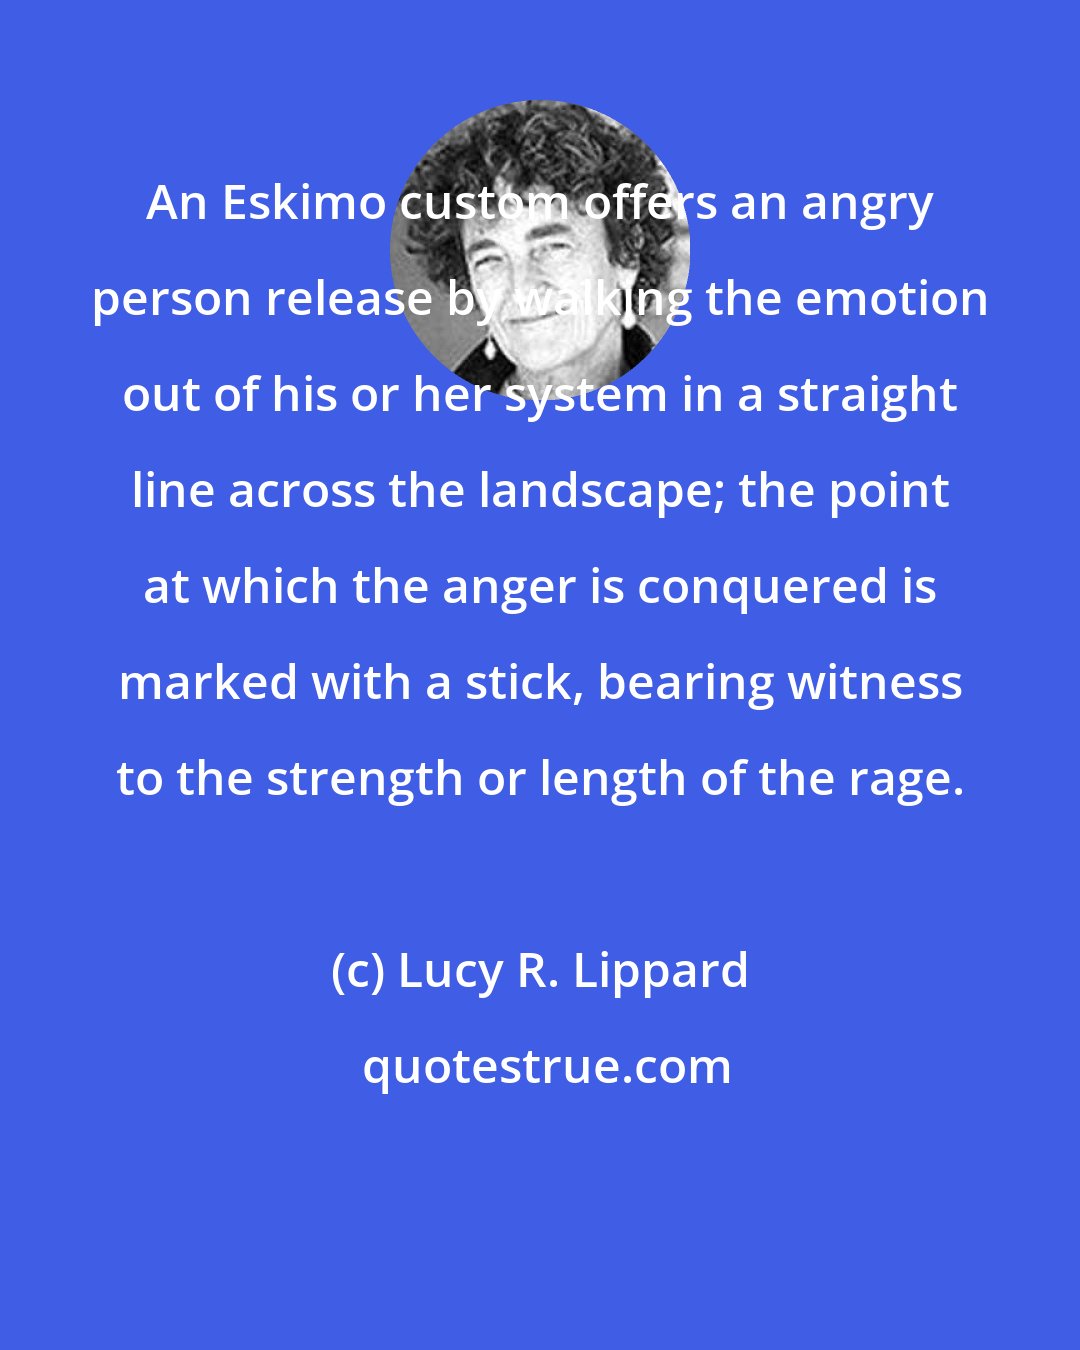 Lucy R. Lippard: An Eskimo custom offers an angry person release by walking the emotion out of his or her system in a straight line across the landscape; the point at which the anger is conquered is marked with a stick, bearing witness to the strength or length of the rage.